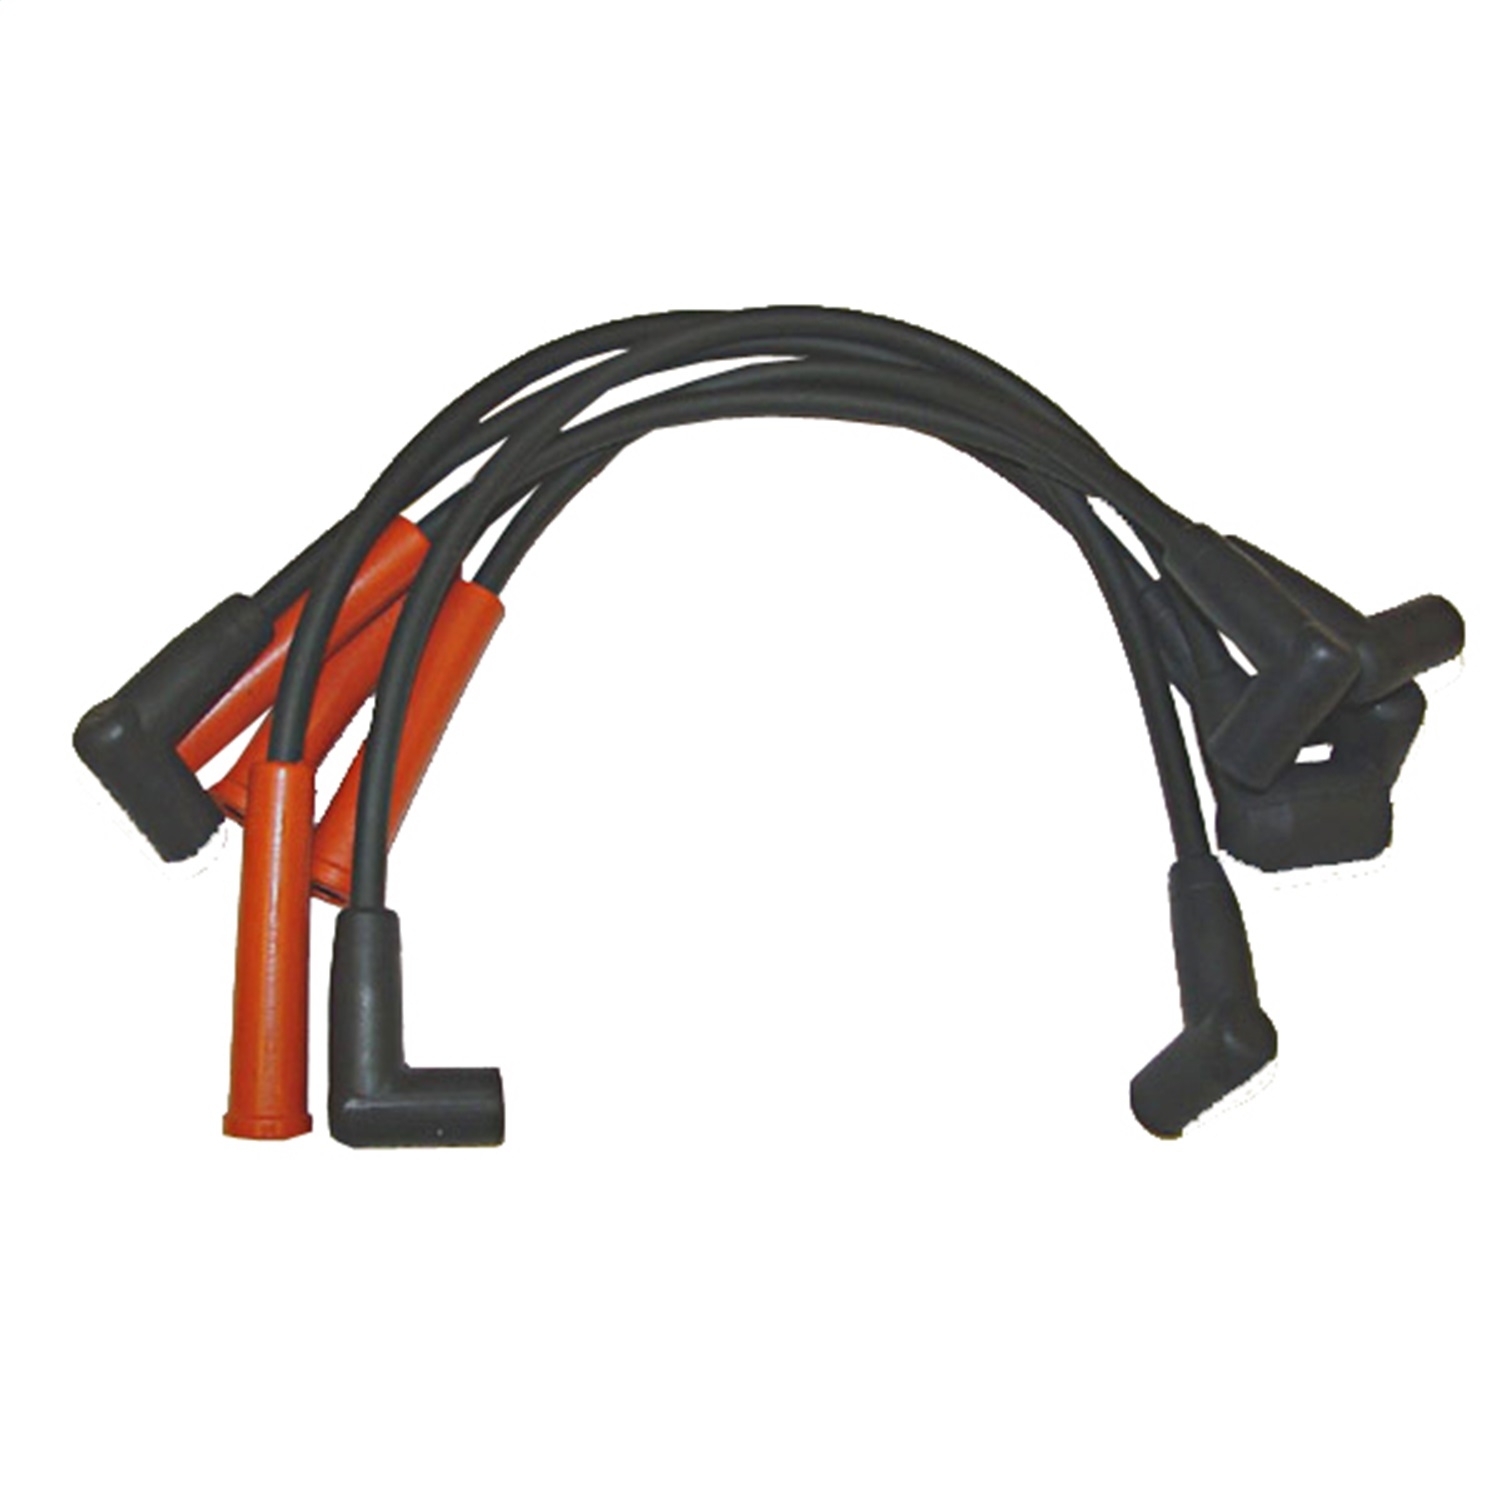 Omix This Ignition Wire Set From Omix Fits The 2.5L Engine In 91-00 Jeep Cherokee And 91-02